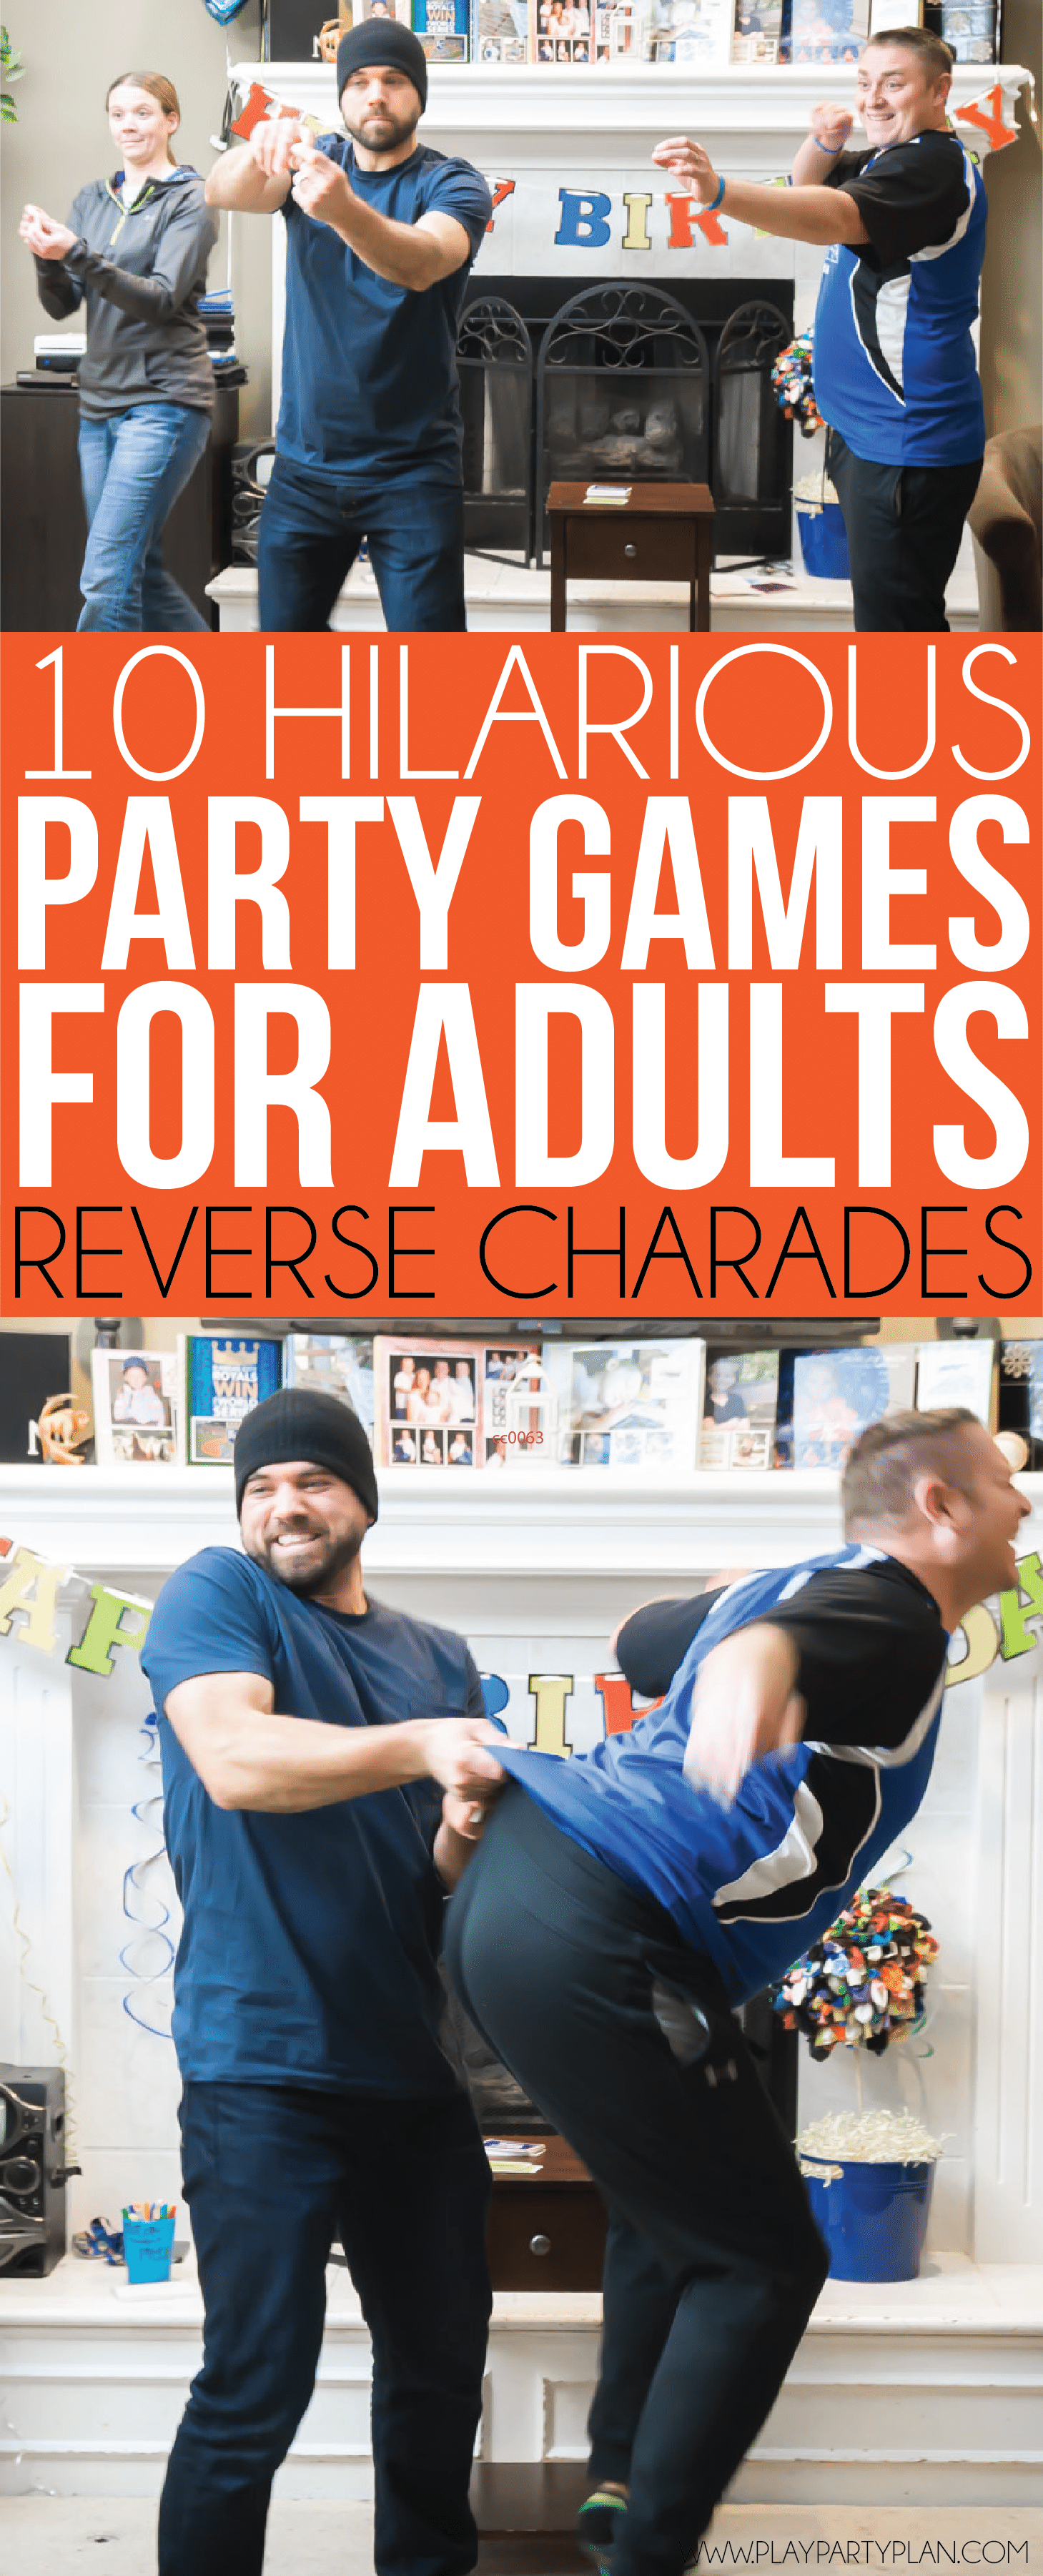 for games play party adults to